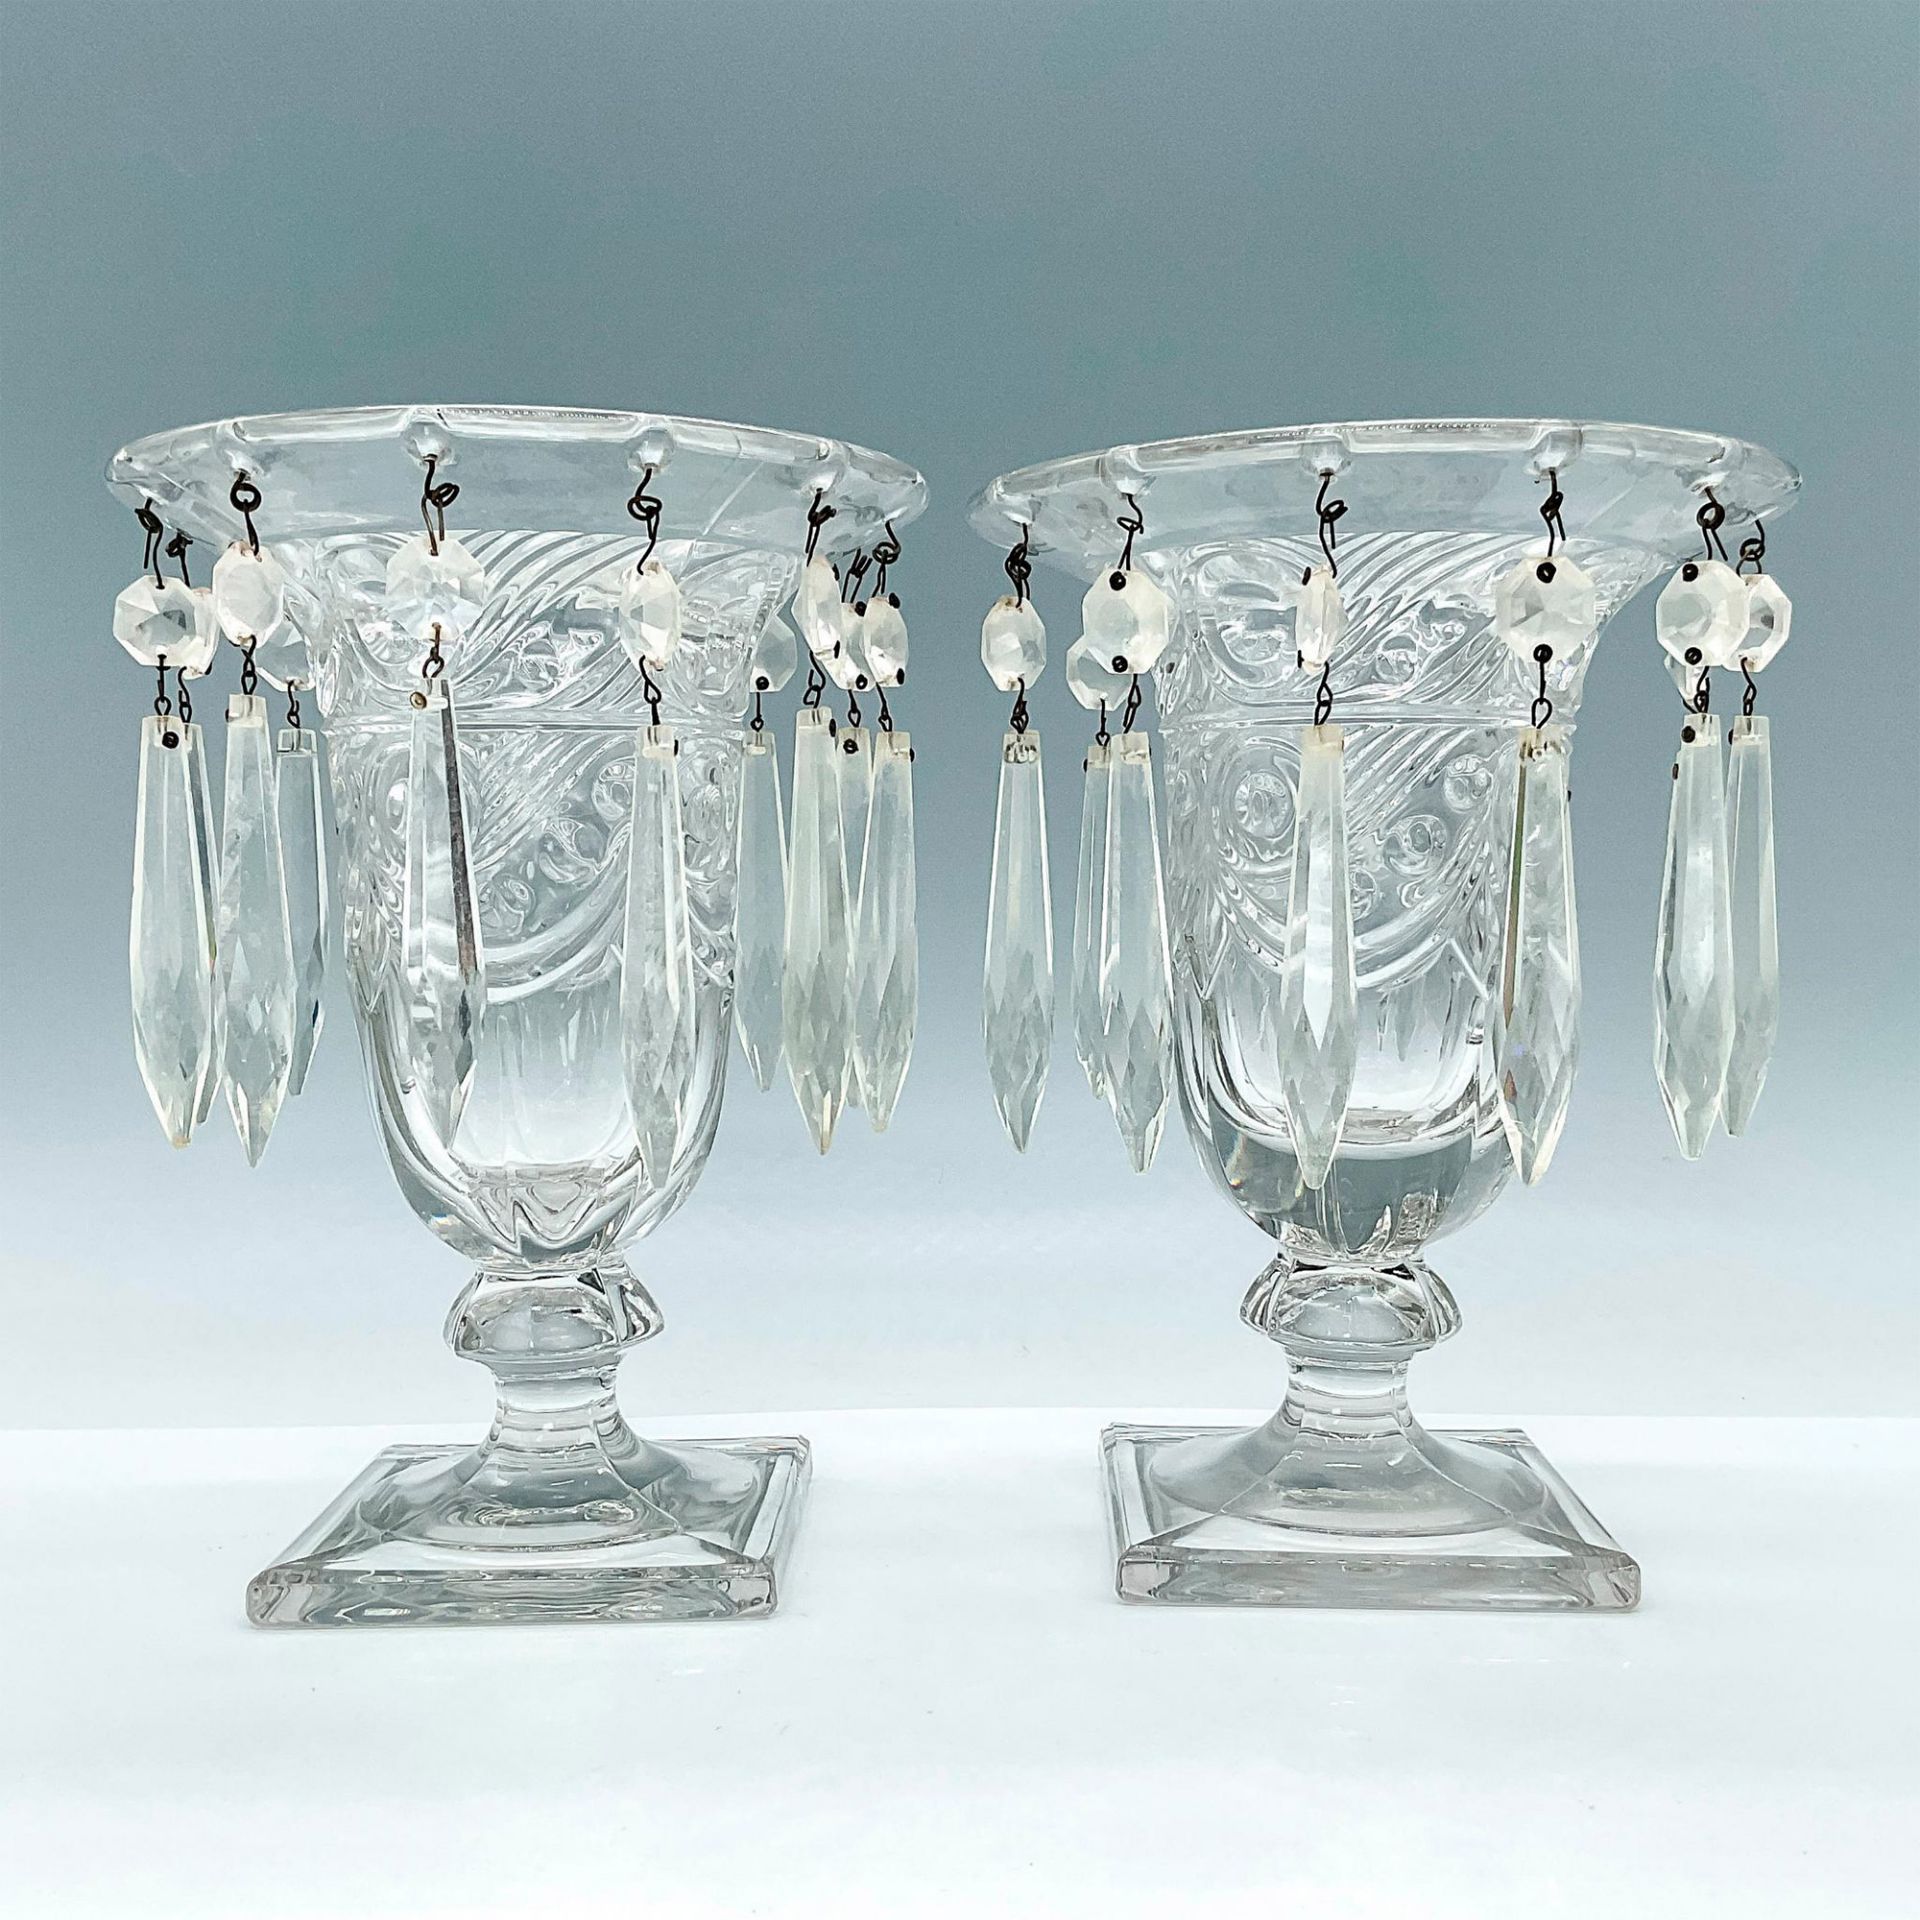 Pair of Heisey Ipswich Candle Centerpiece Vase with Prisms